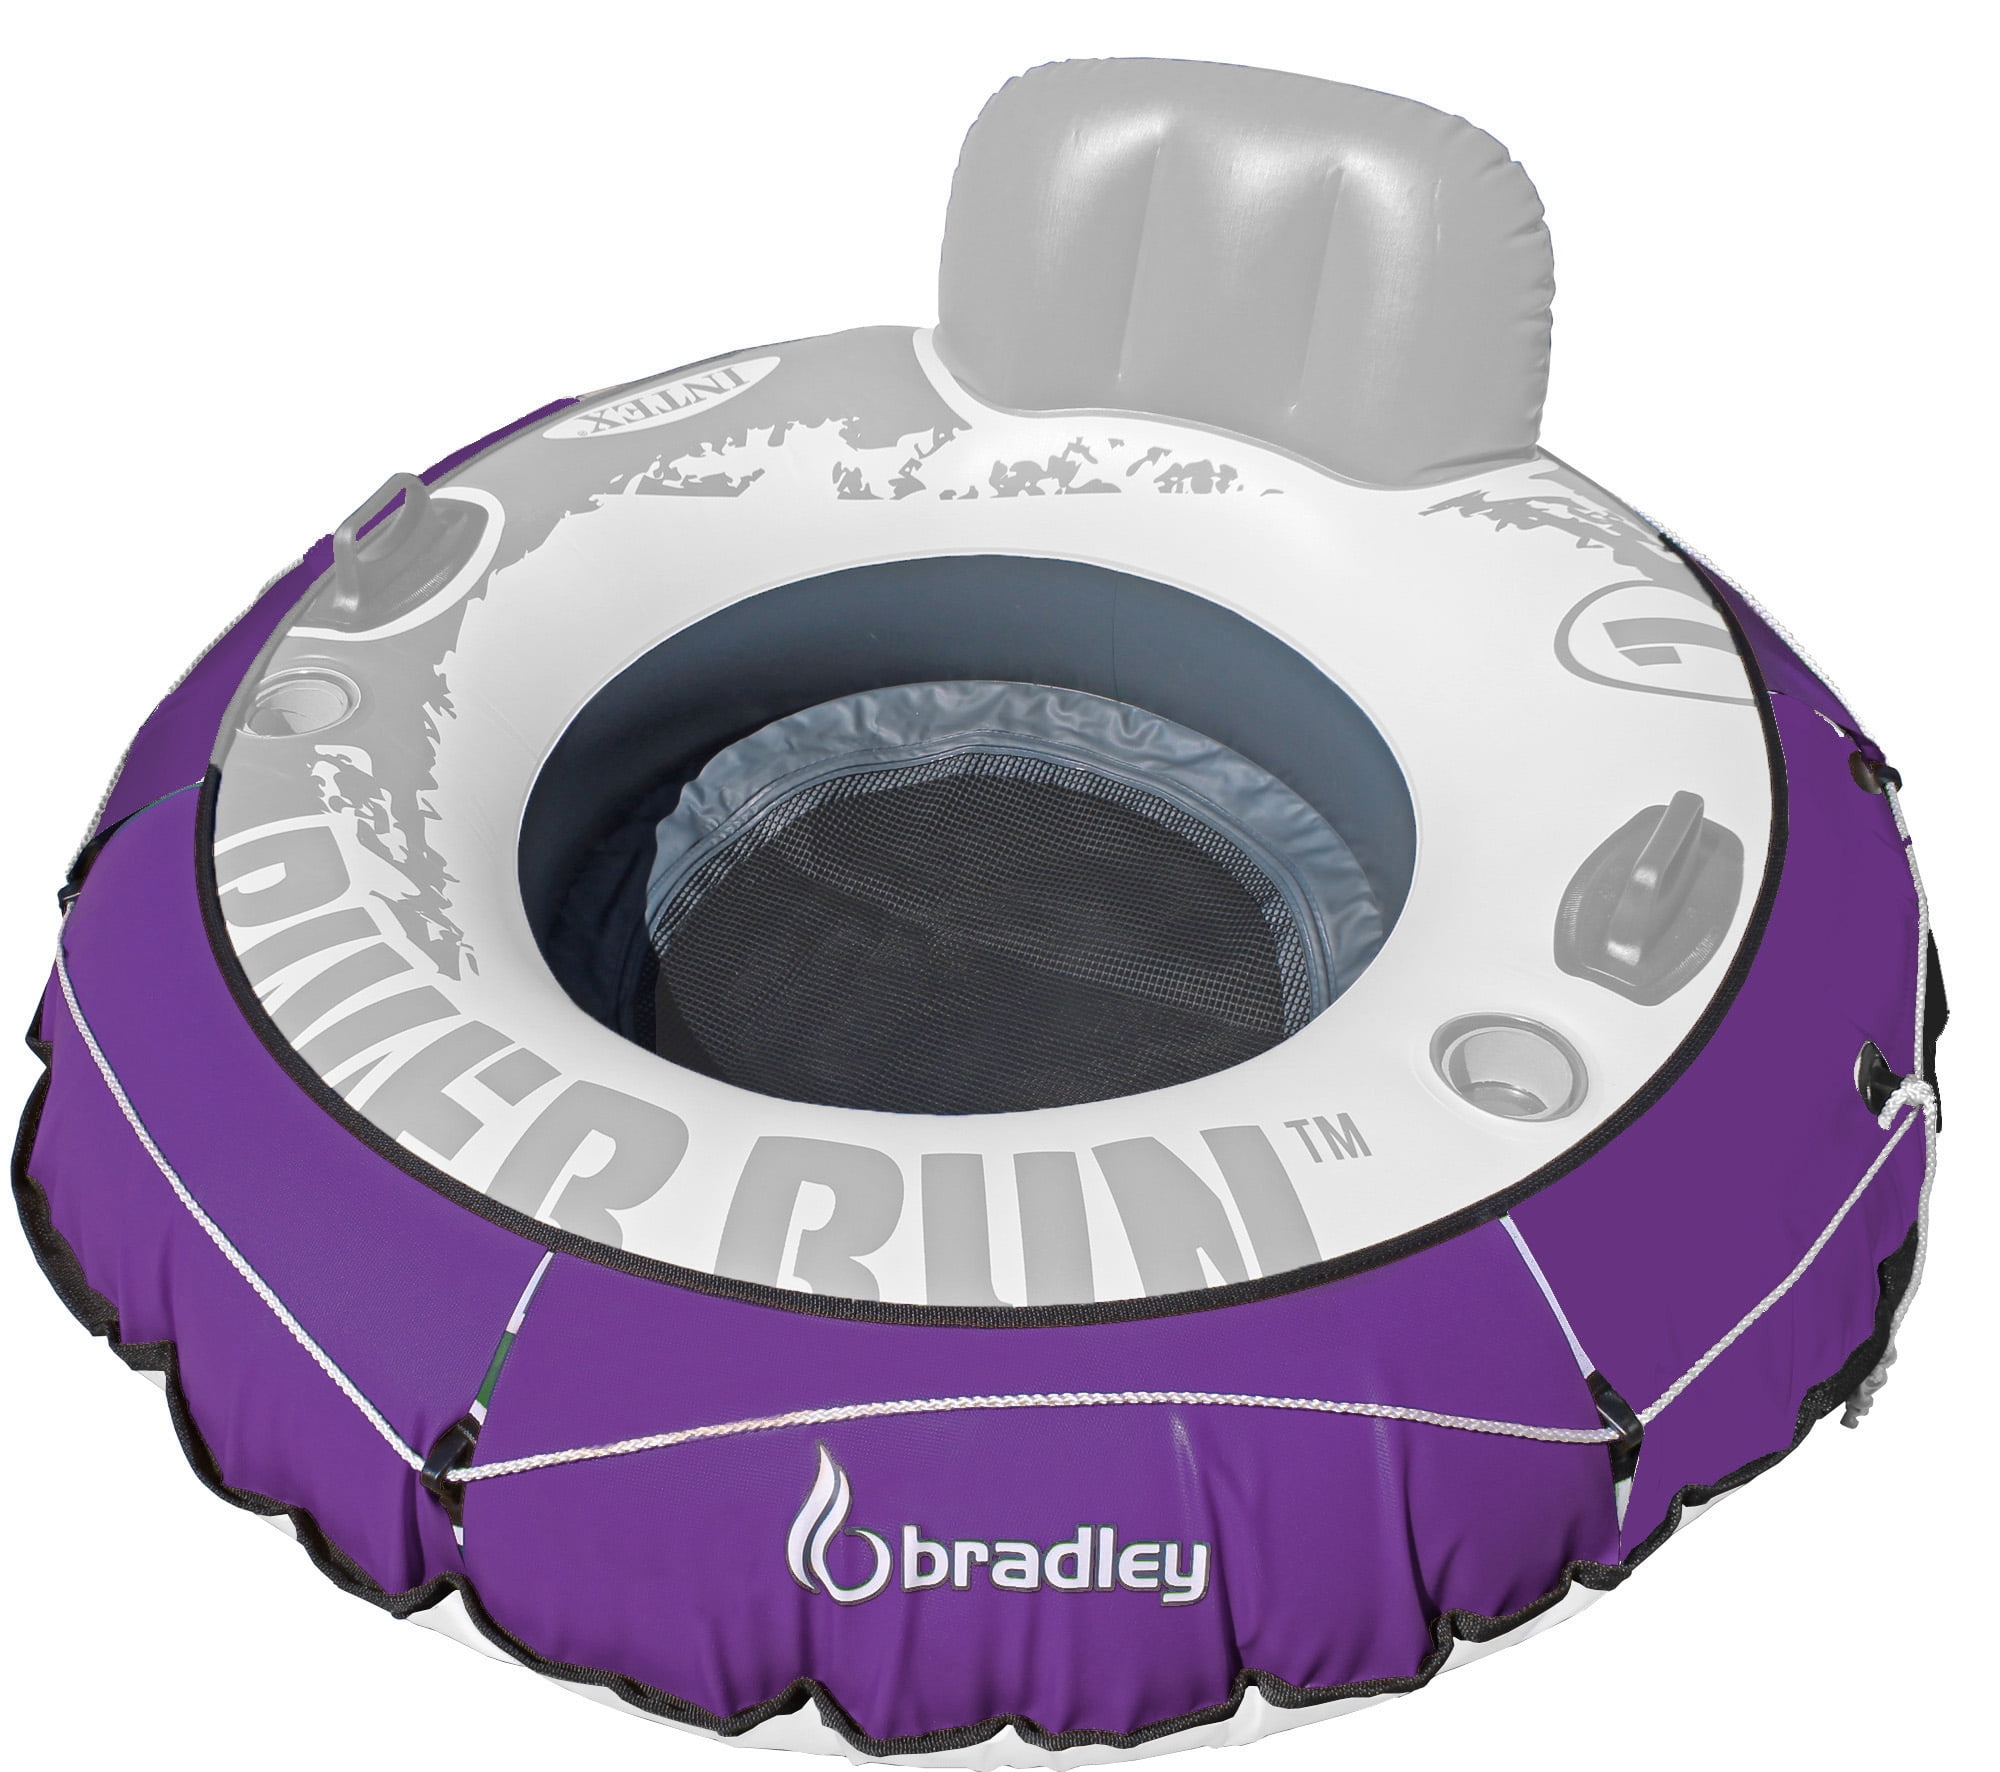 Bradley River run tube cover; compatibile with River Run tubes; convert  your pool tube into heavy duty rafting tubes. Fits most inflatable 53 inch river  float tubes. 